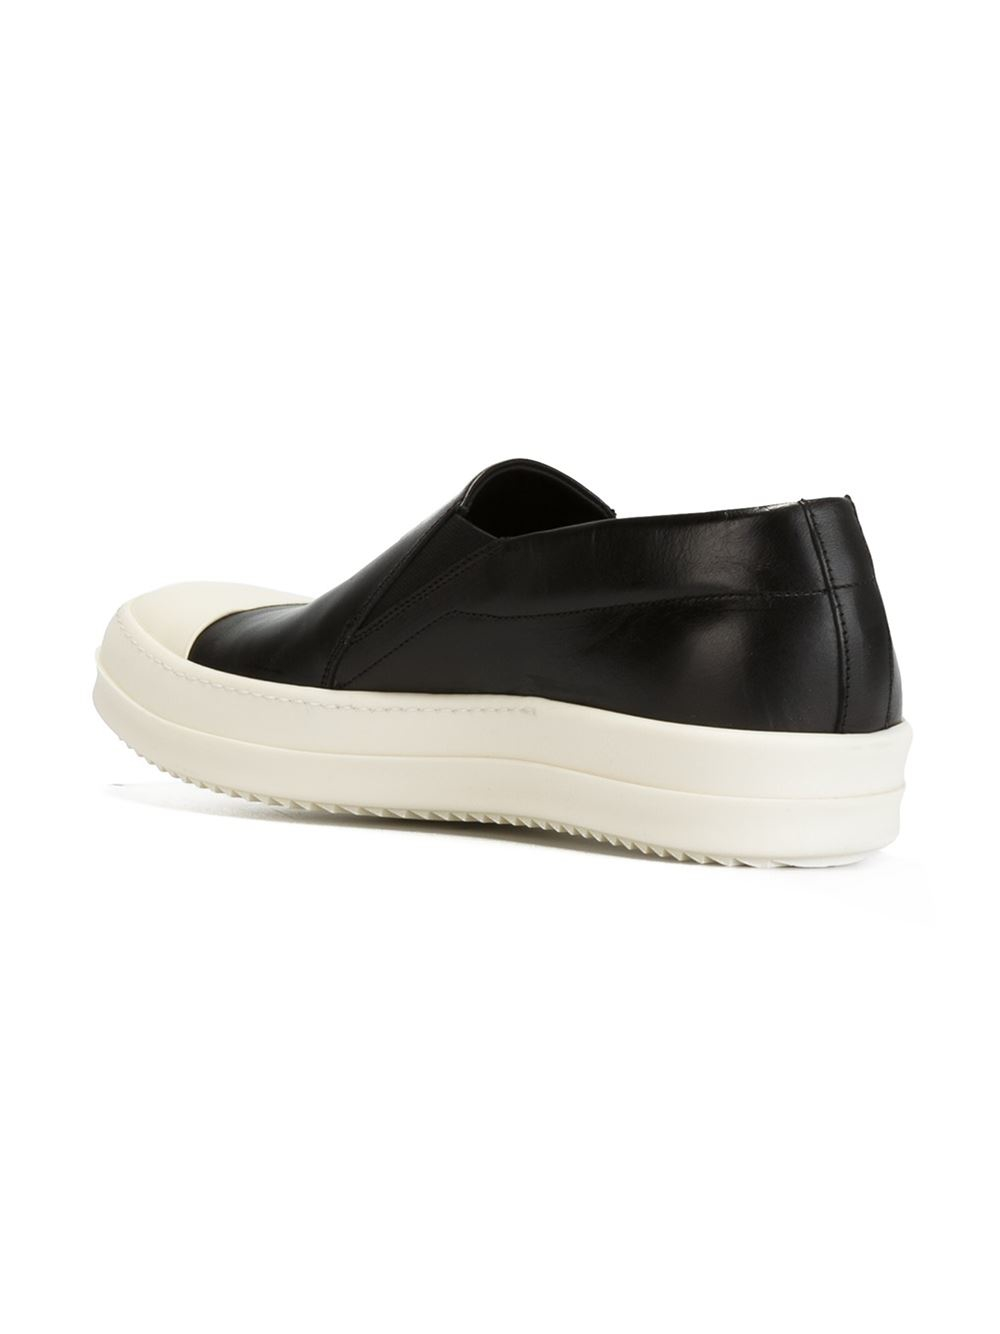 Rick owens Leather Slip-On Sneakers in Black for Men | Lyst